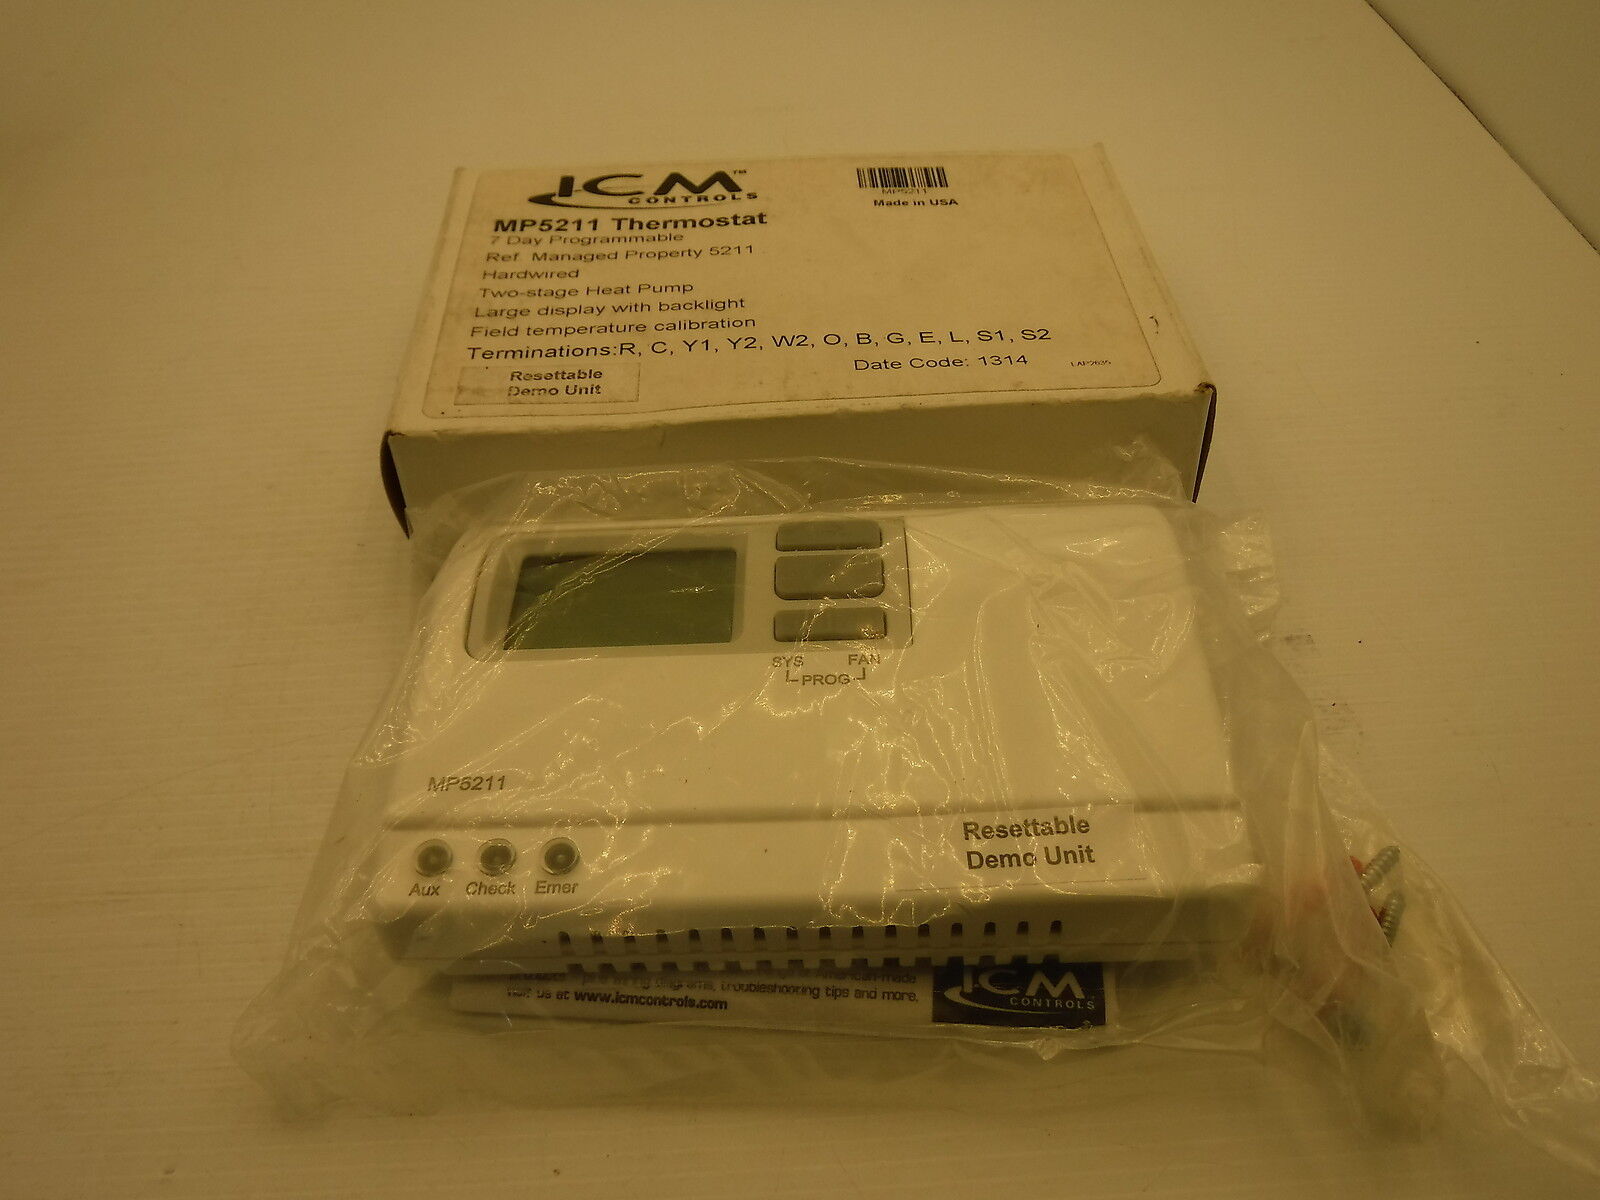 ICM CONTROLS MP5211 Low Voltage Thermostat, 7 Day Programmable NIB